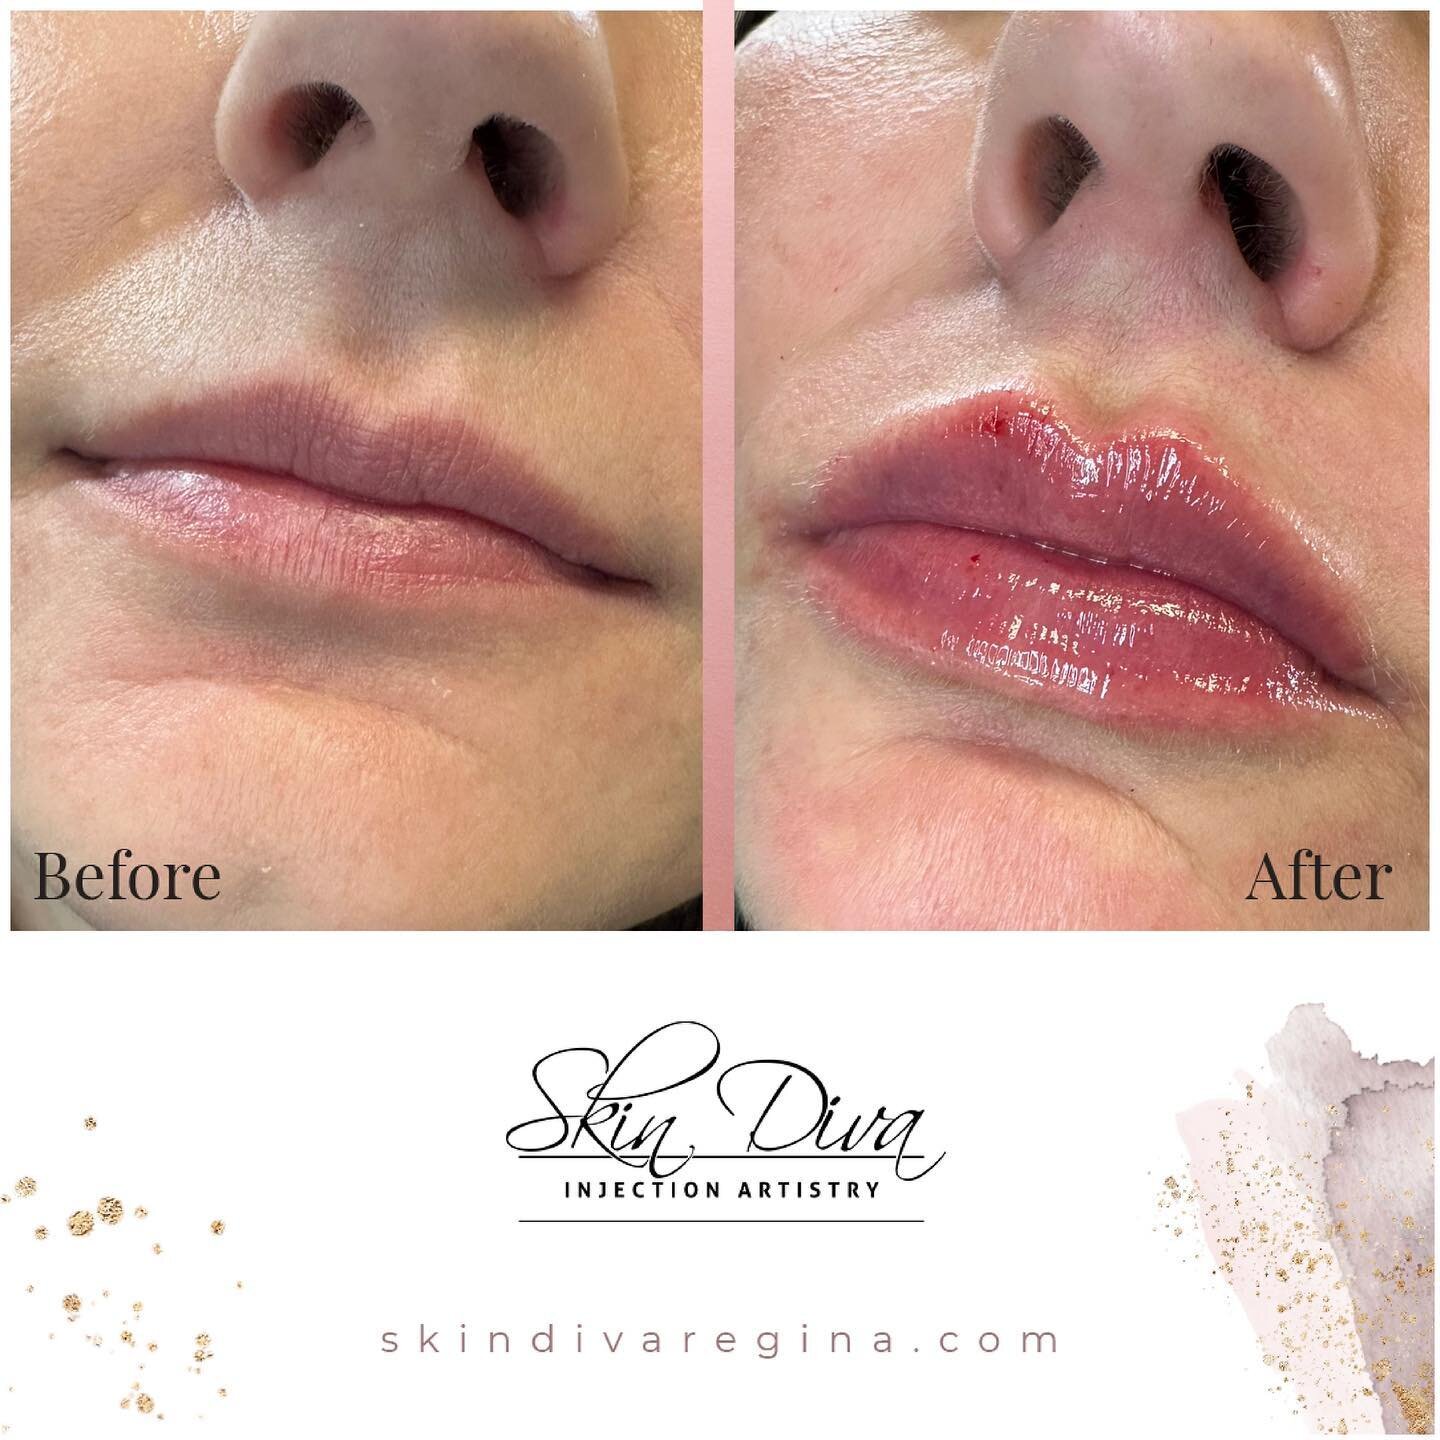 Soft rejuvenated pout for this gals birthday,Happy Birthday 🎈 

Product: RHA 2 &amp; Kiss

💉Product: RHA &amp; Kiss 
⏰Length of appointment: 60 mins
⏳Duration of product: 6-9 months
🤕Side effects: redness, swelling, potential bruising

To book an 